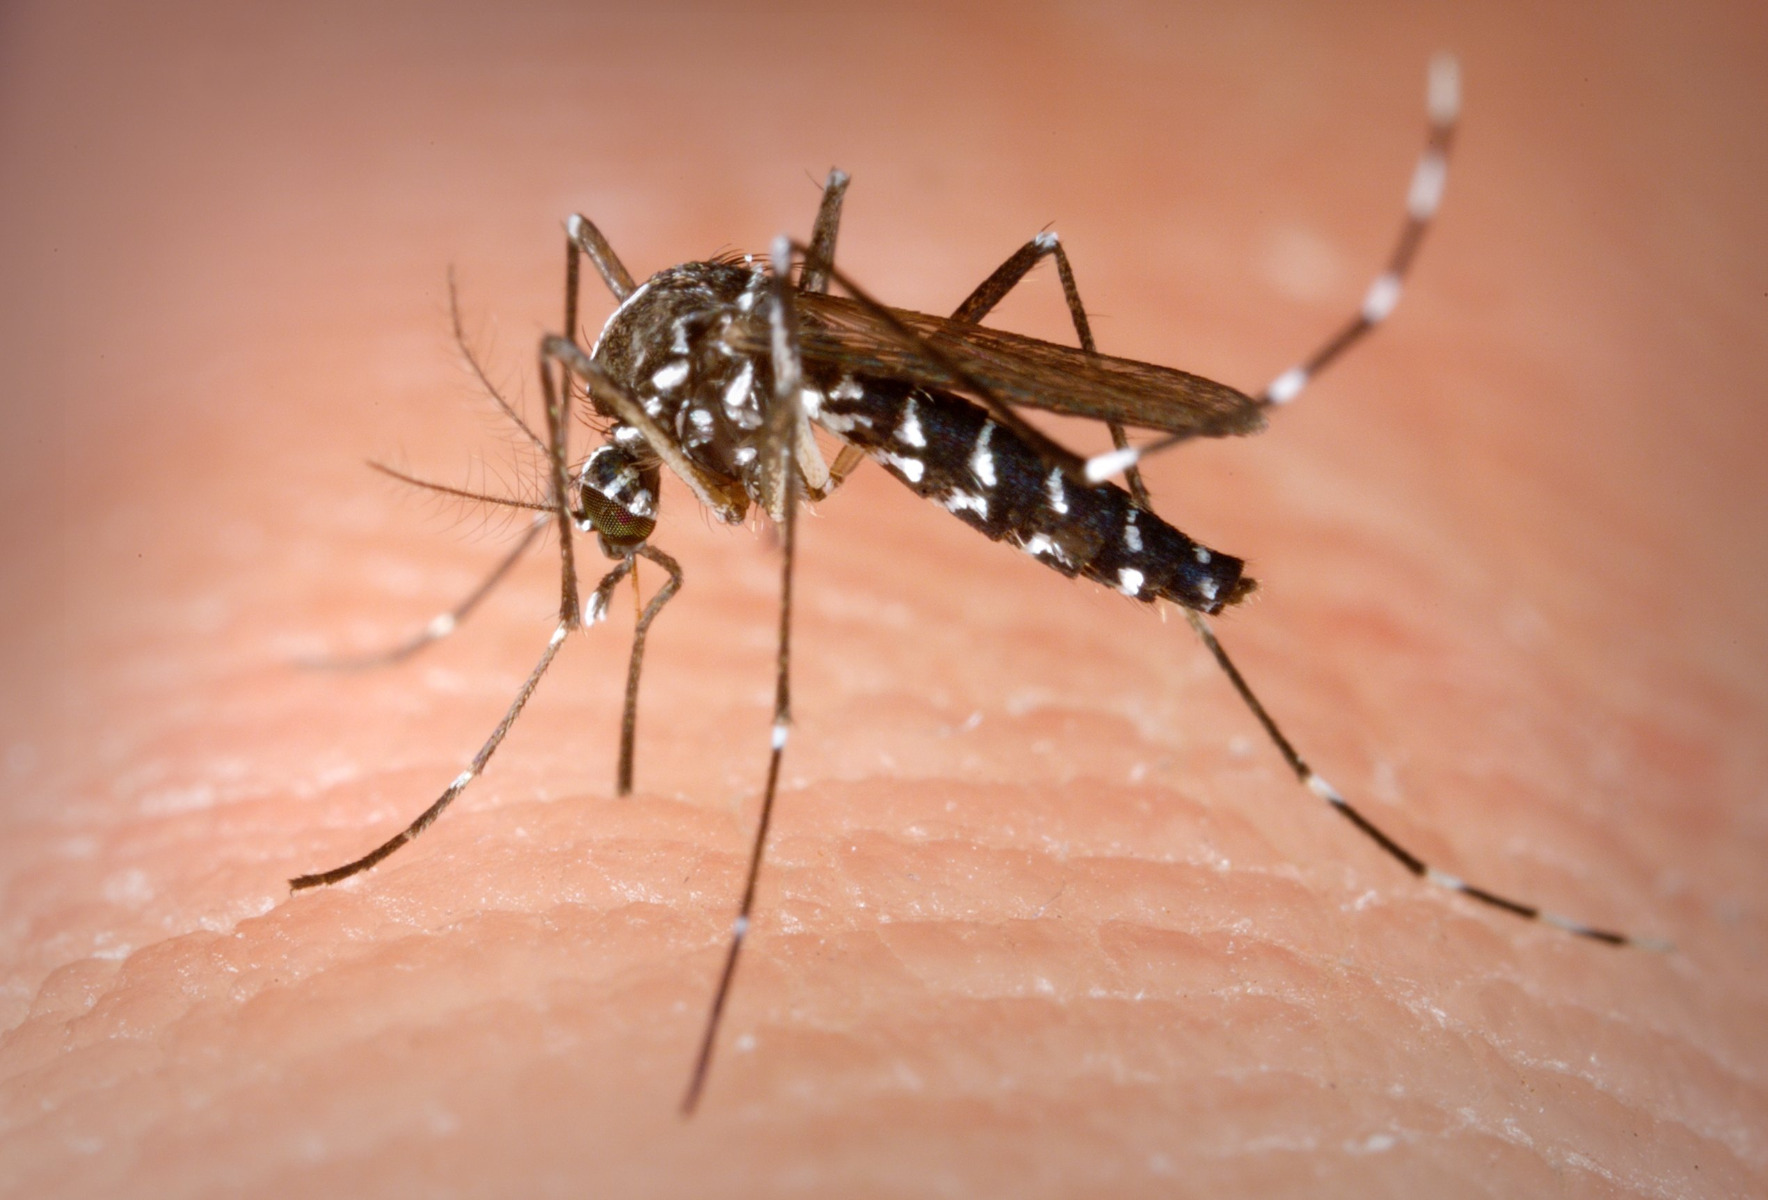 An image of the Asian Tiger Mosquito biting a human.